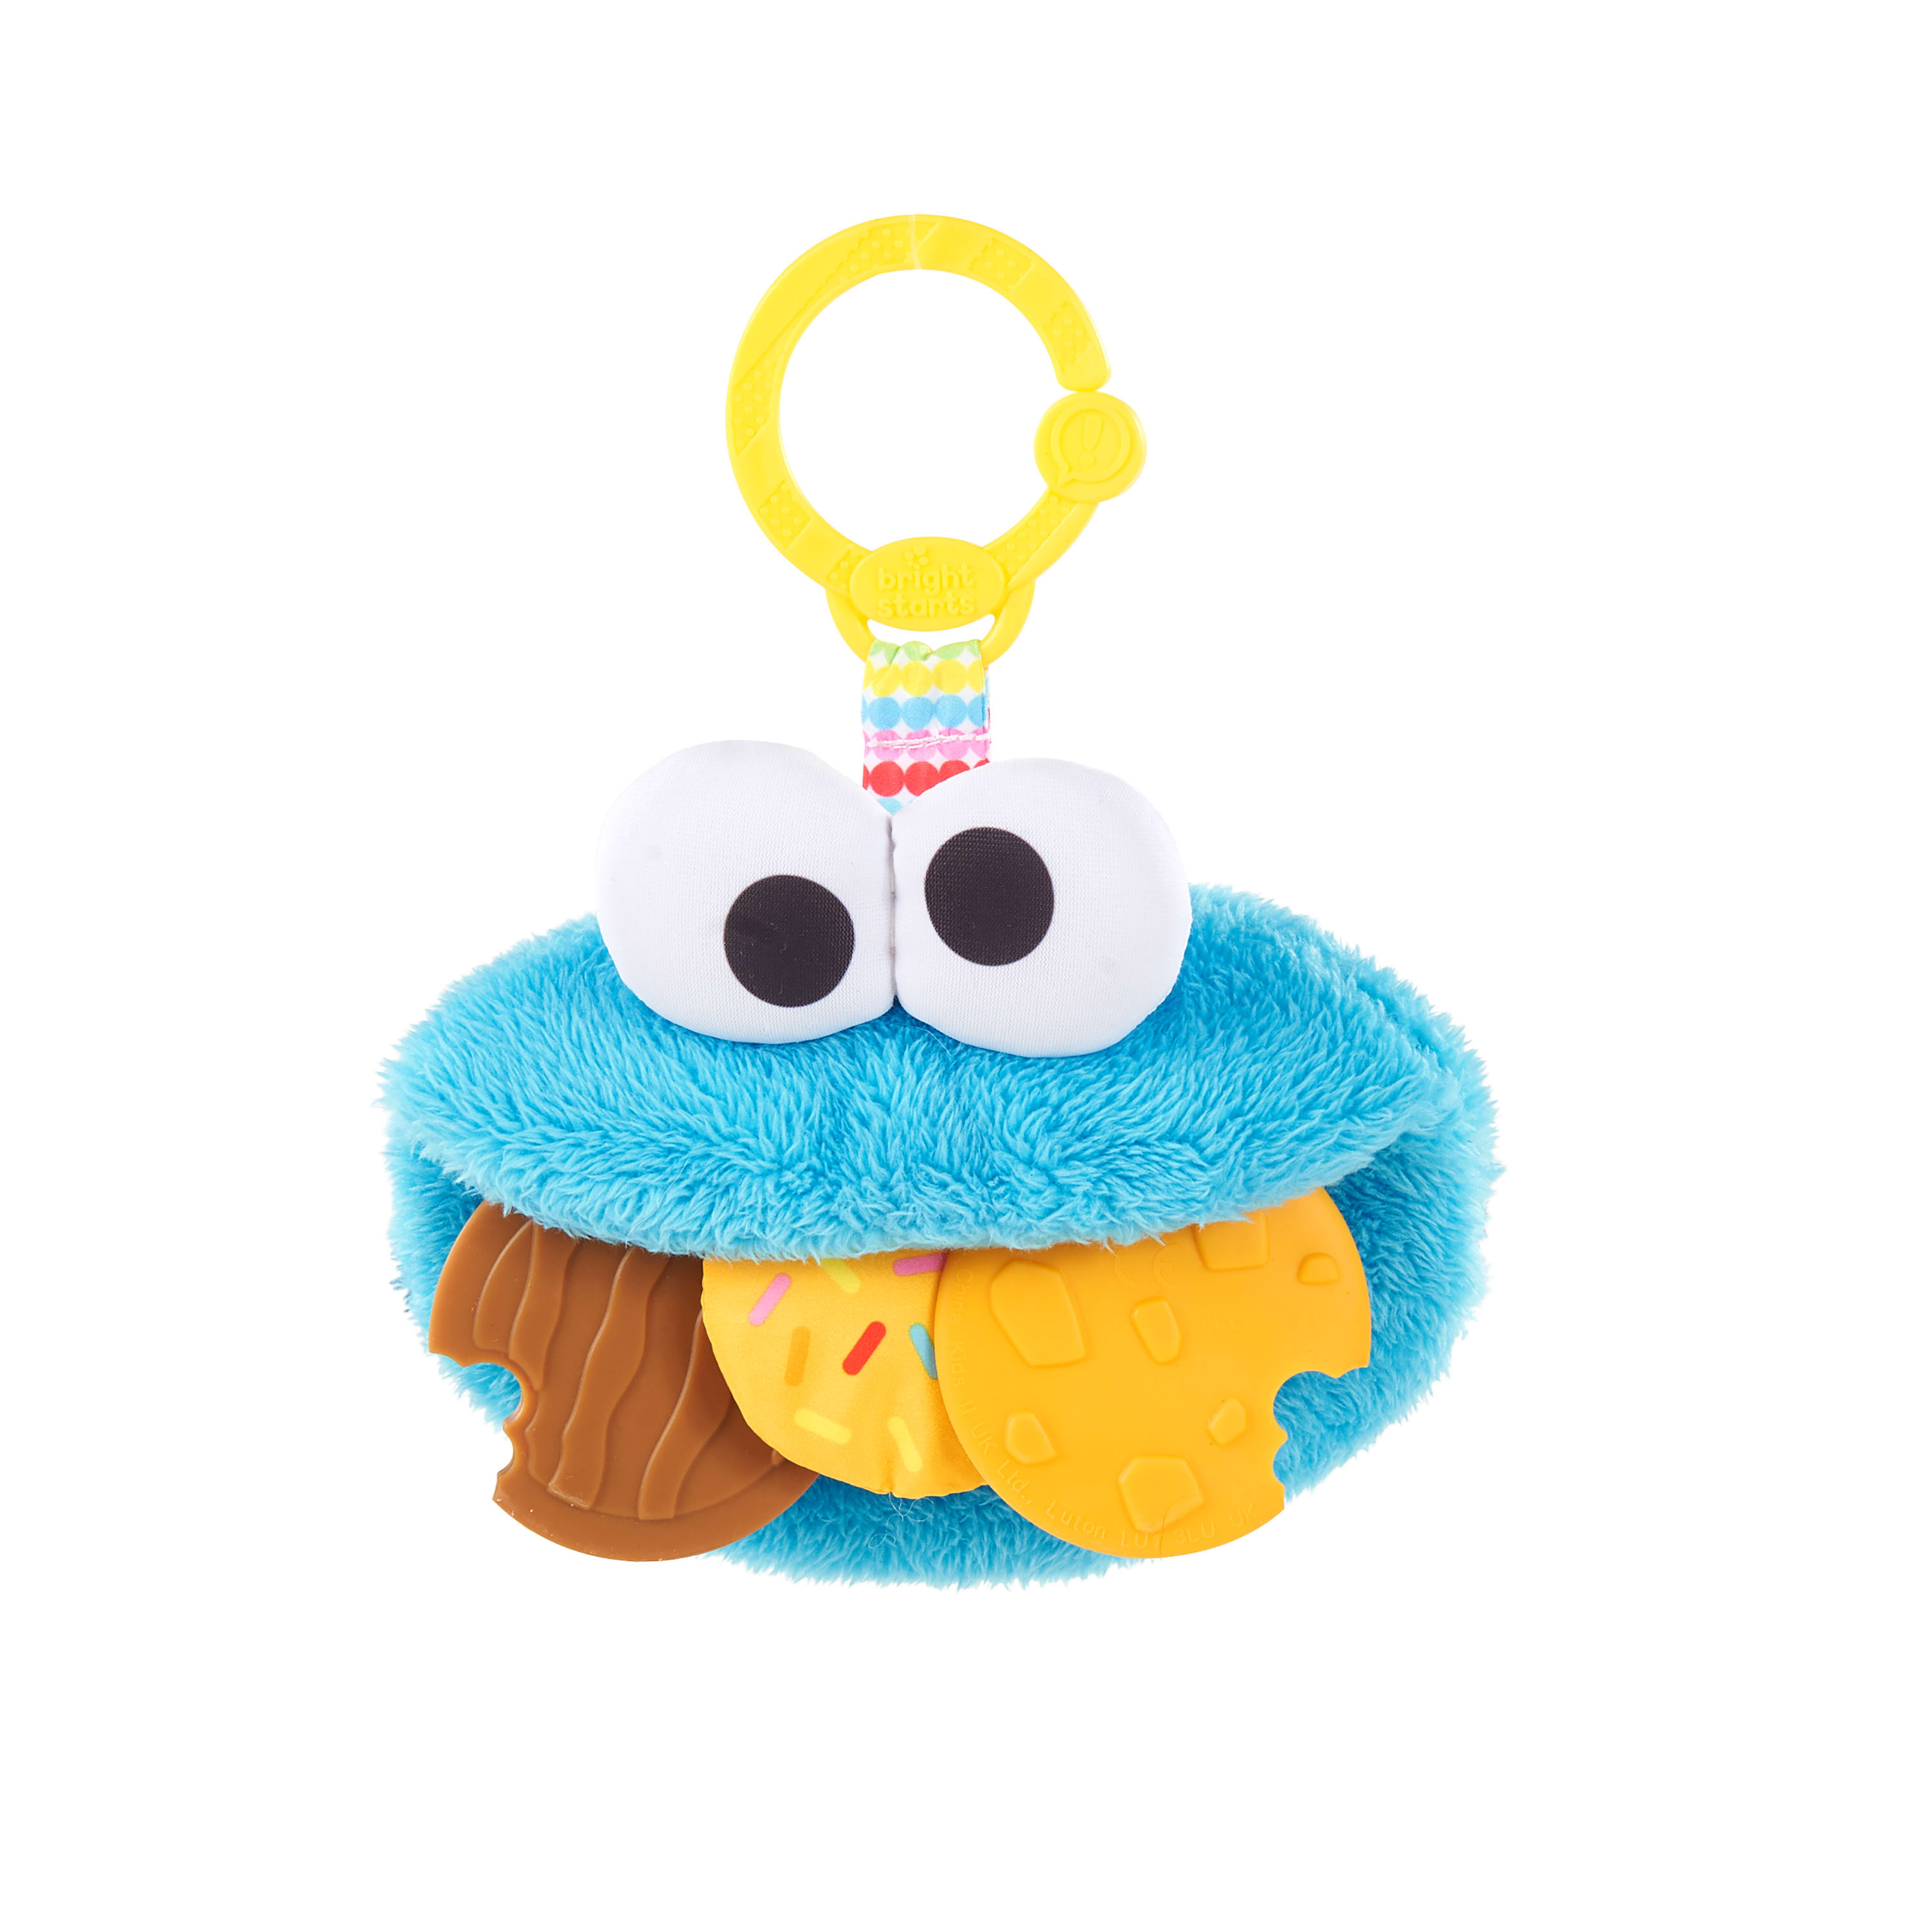 Bright Starts Sesame Street Cookie Monster Mania Teether, Stroller or Carrier Toy, Age 3-12 Months - image 1 of 10